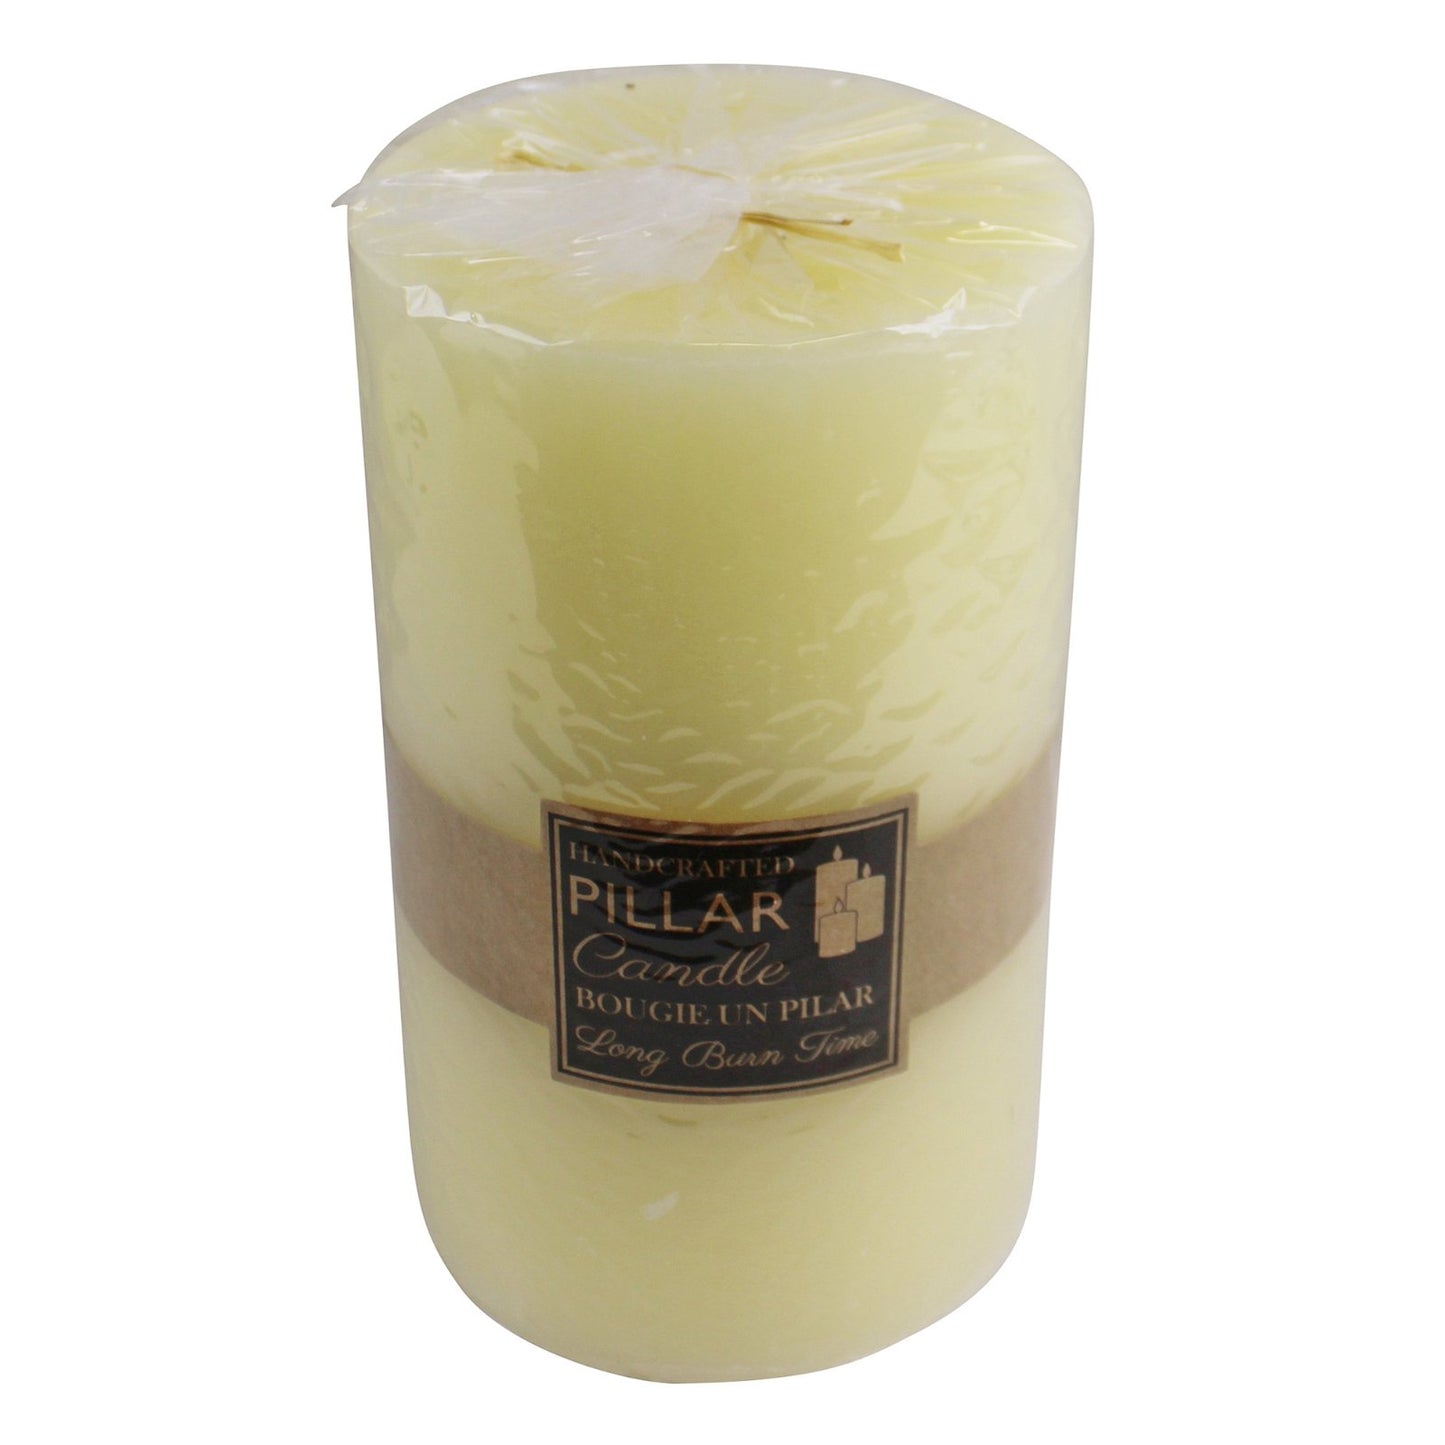 Large 3 Wick Church Pillar Candle - UK Only